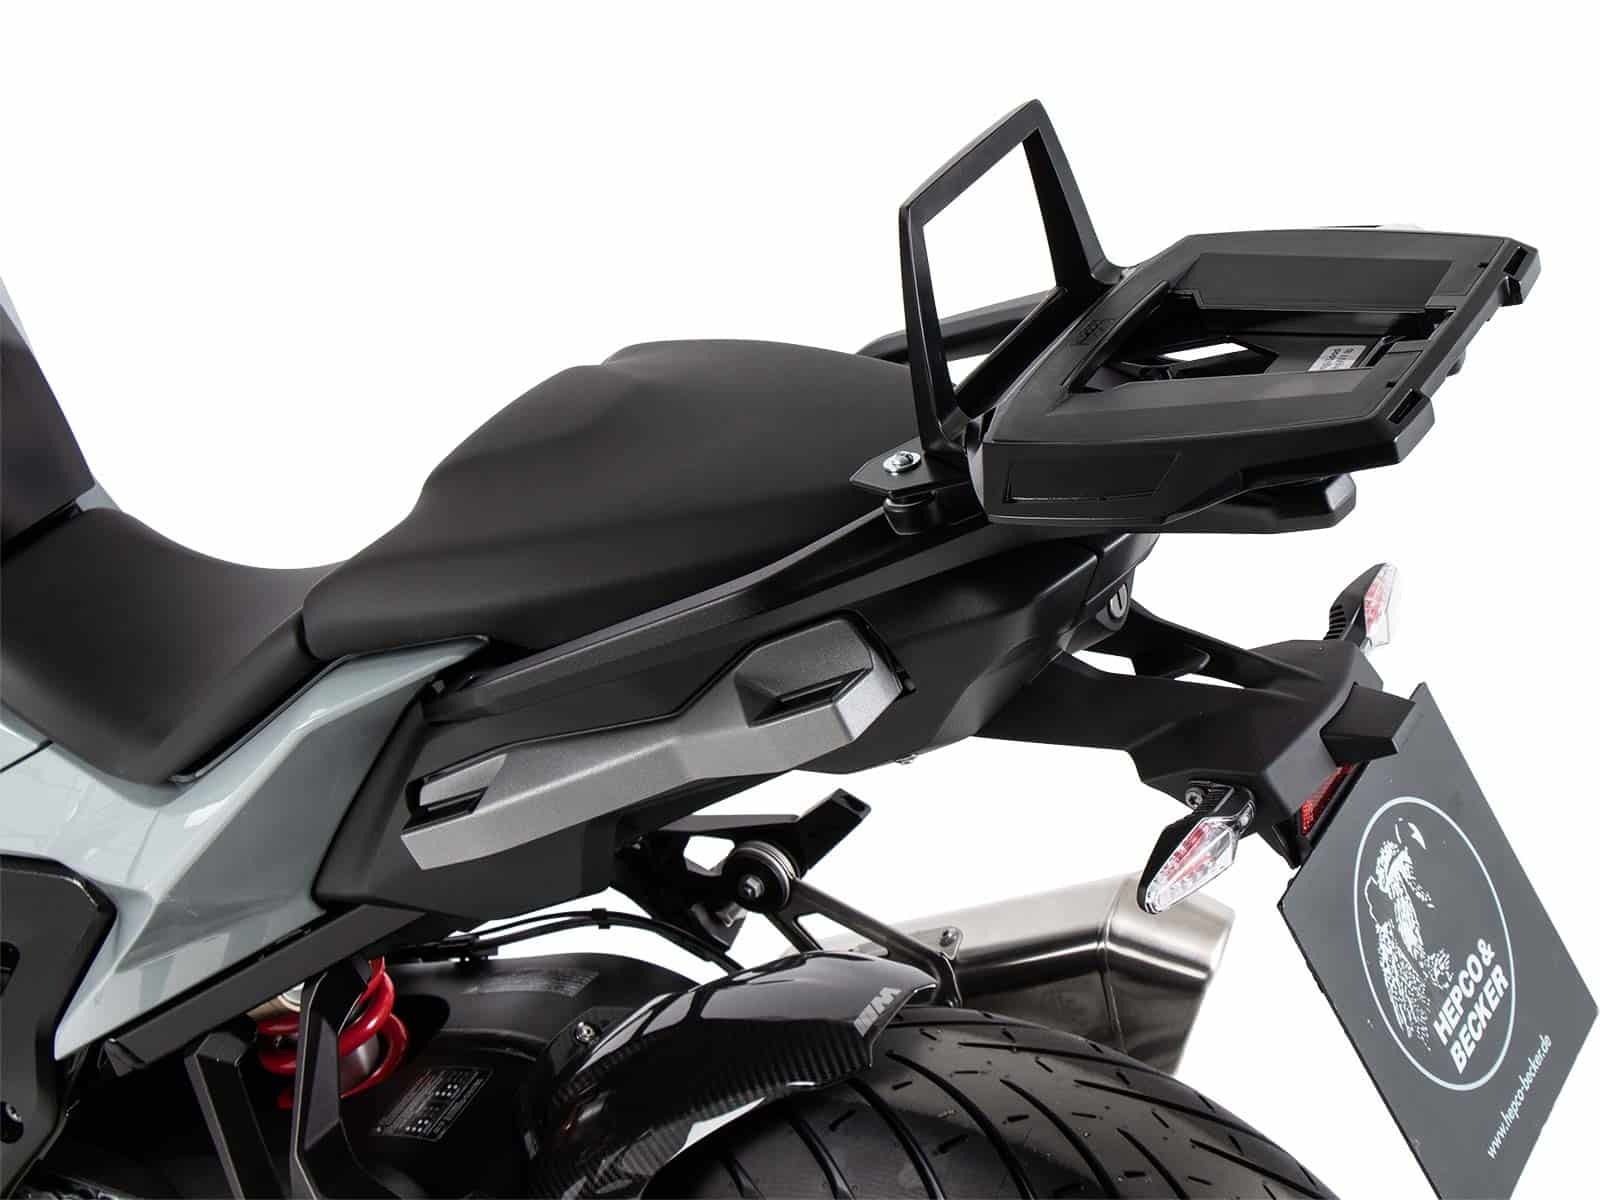 Alurack top case carrier black for combination with original rear rack for BMW S 1000 XR (2020-)